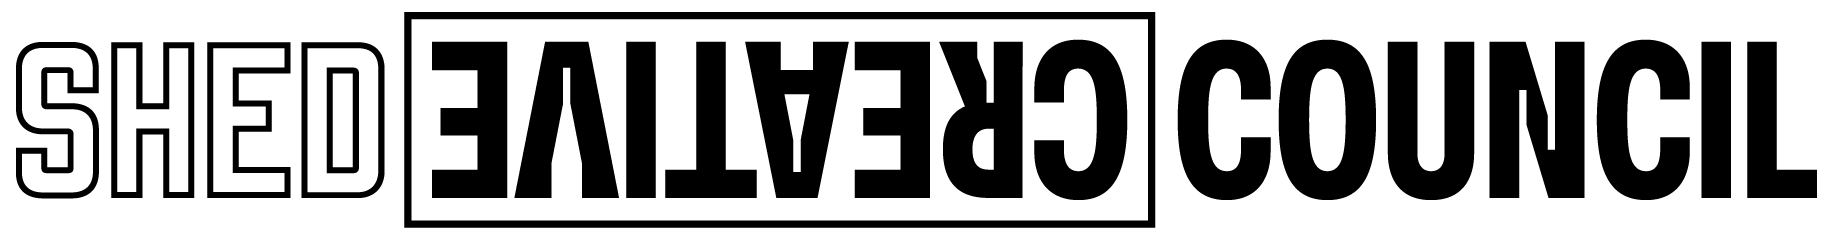 Shed Creative Council logo, with the group's name listed horizontally. The word creative appears upside down.